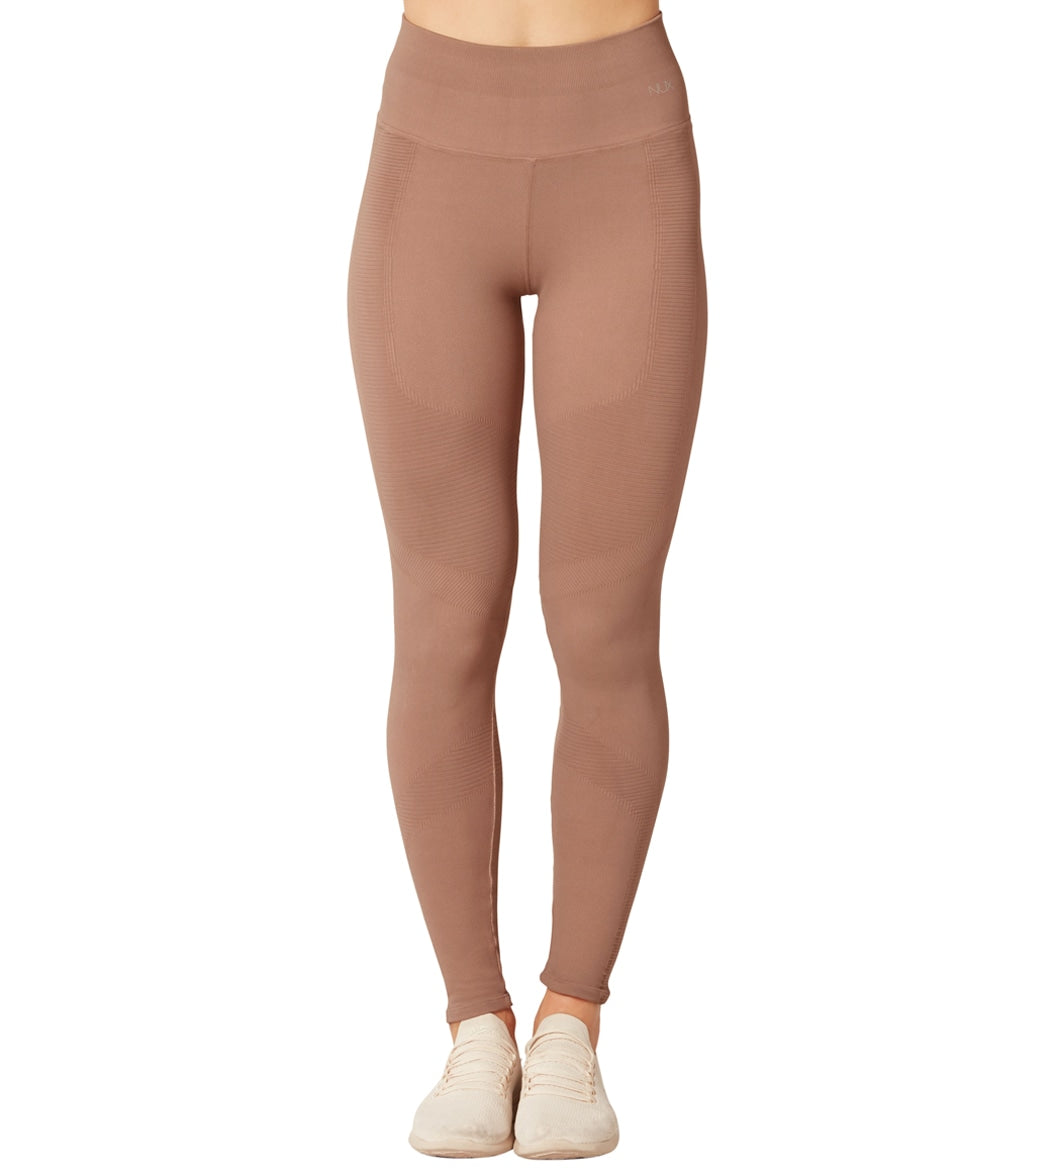 NUX One By One Seamless Yoga Leggings